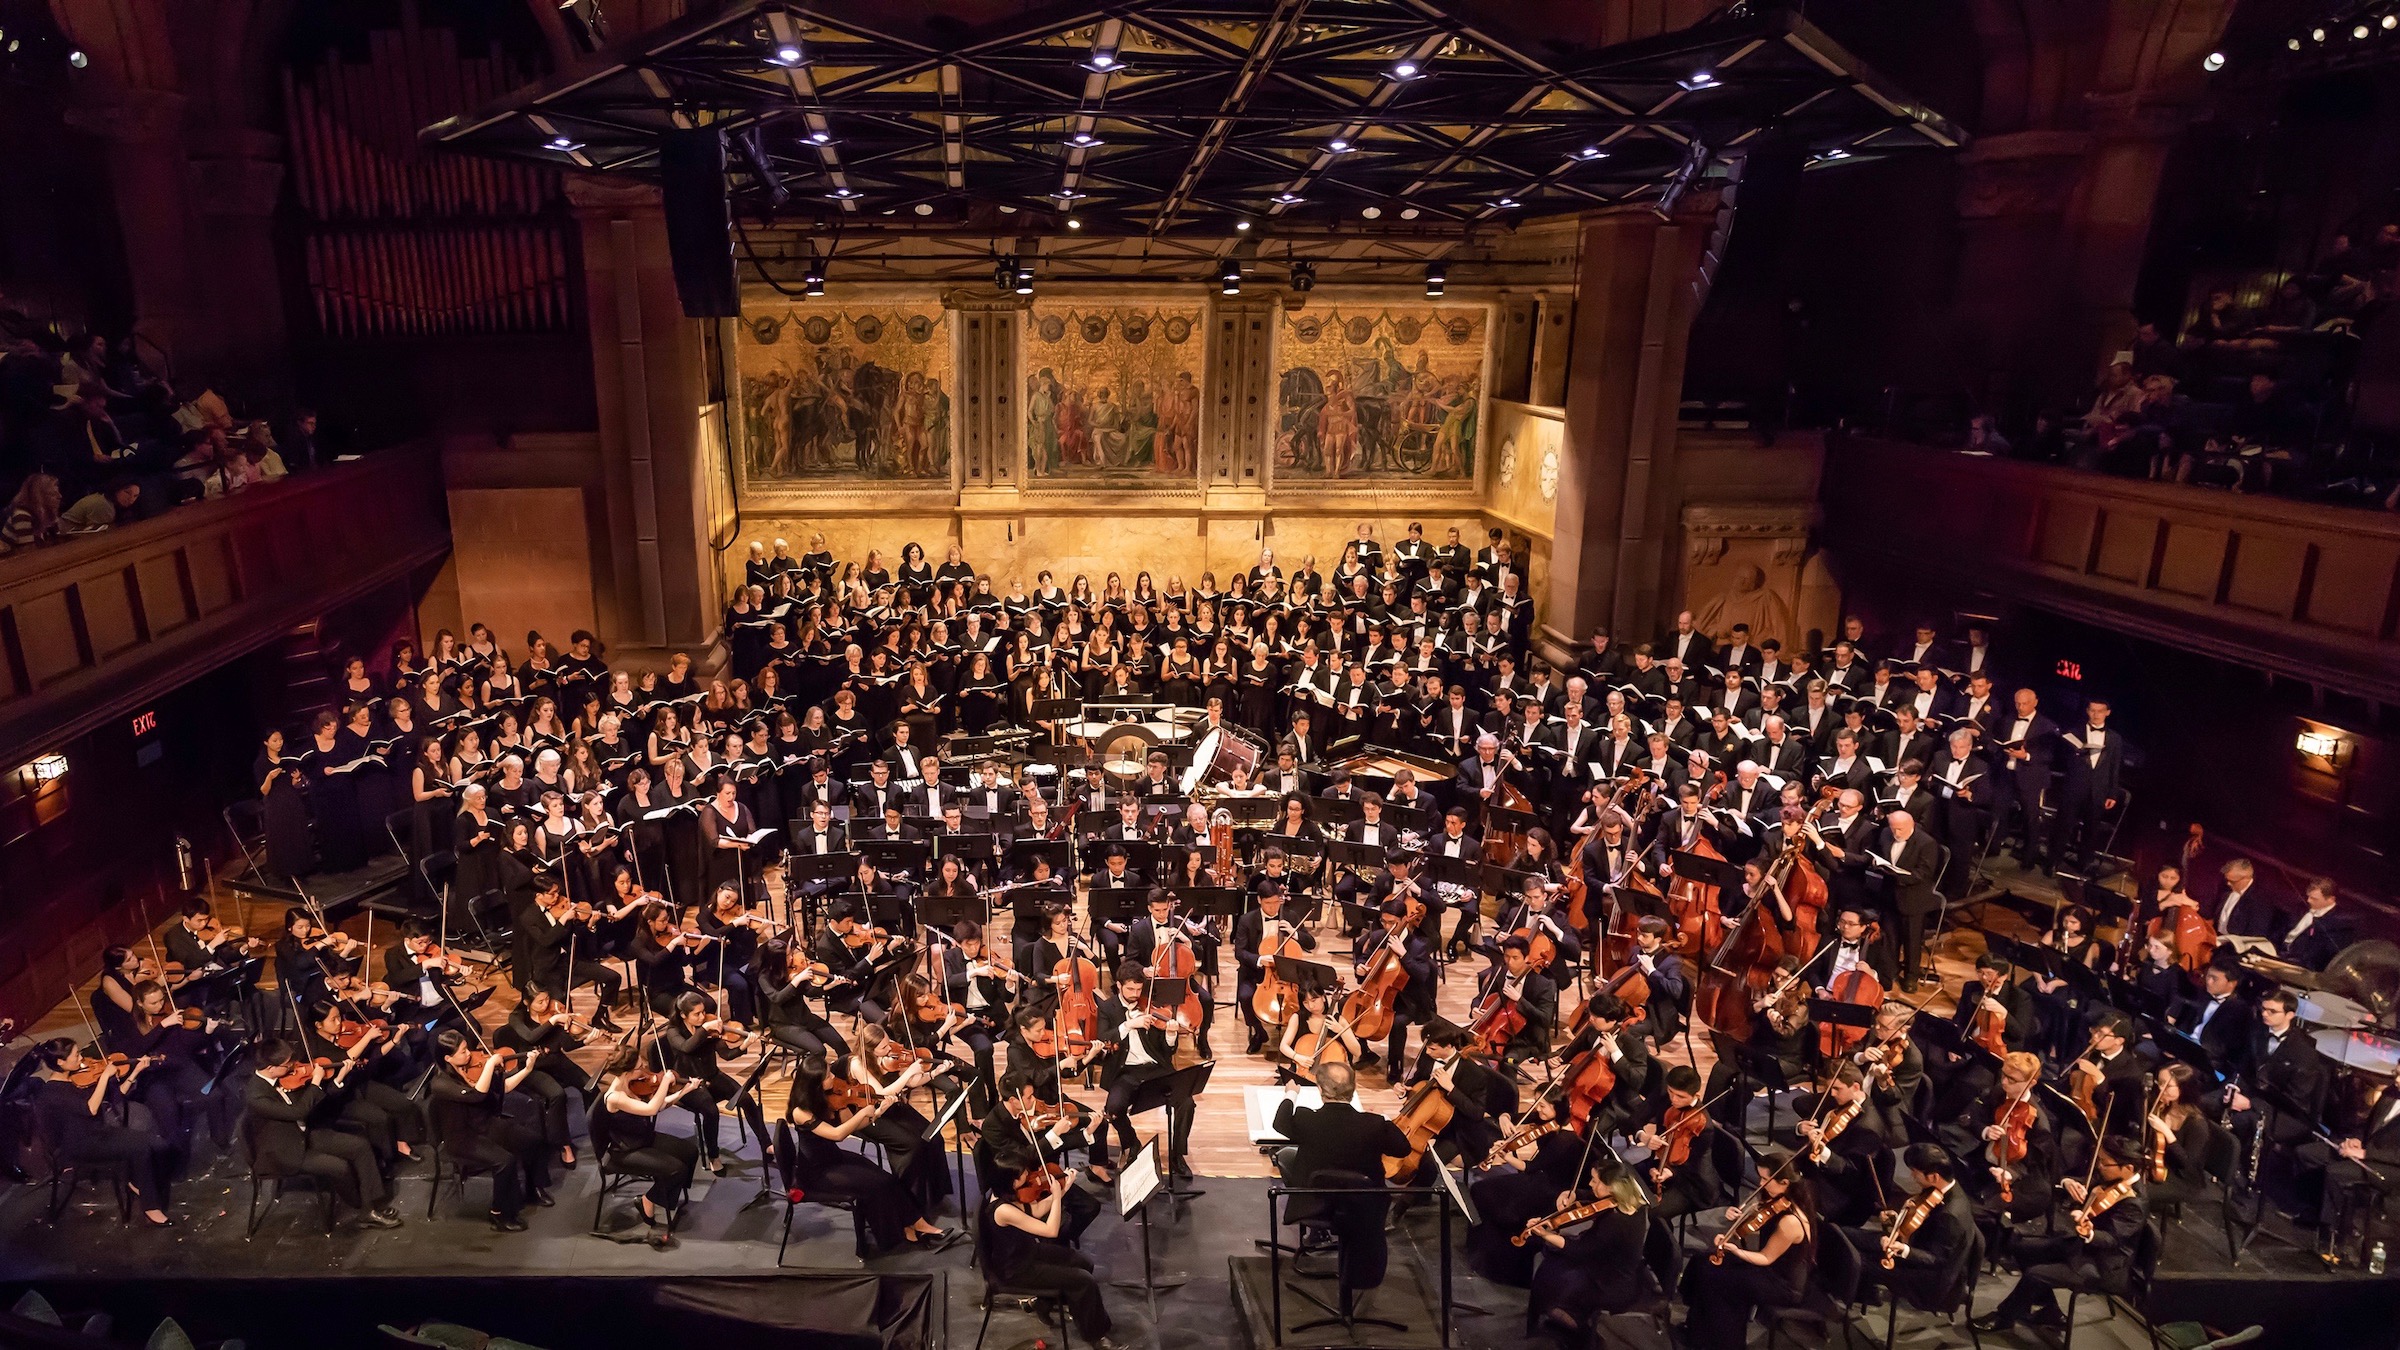 photo of Princeton University Orchestra and Glee performing on stage together.